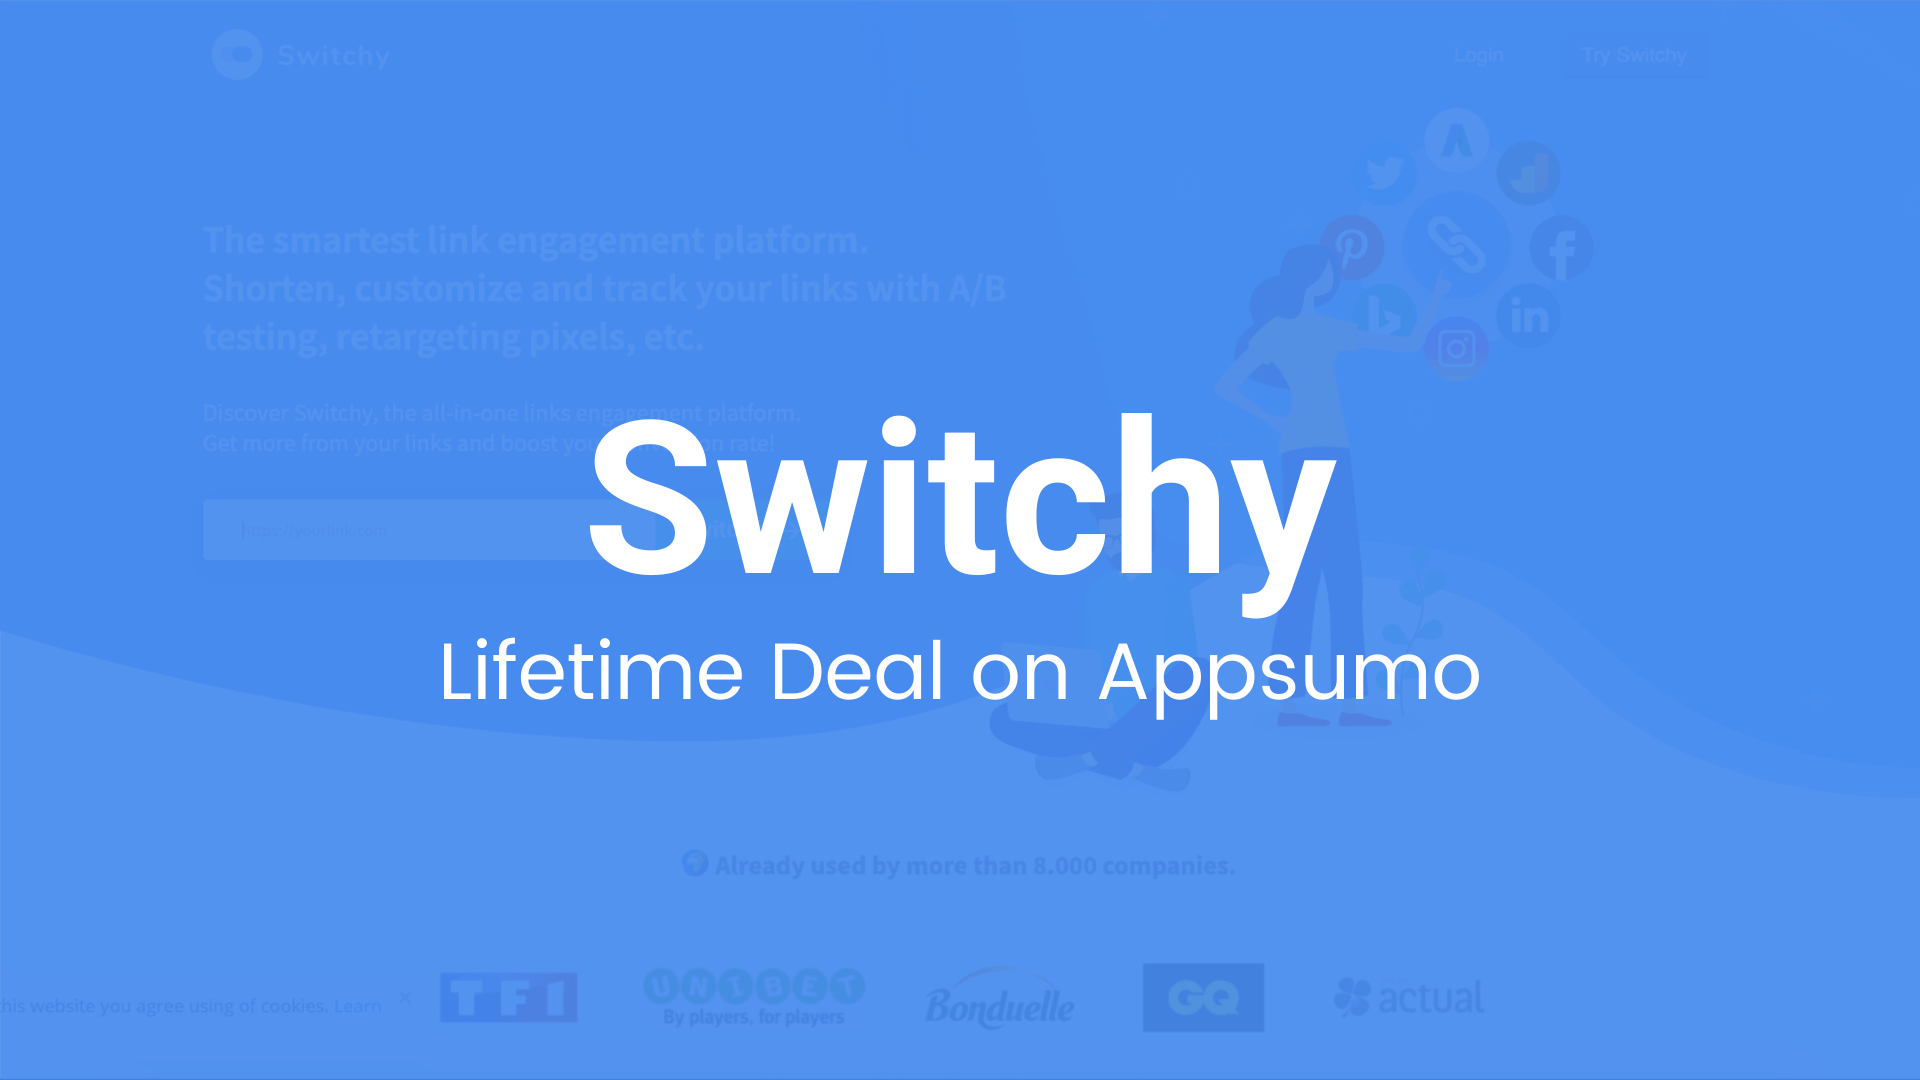 Switchy: Custom Retargeting Links For Engagements